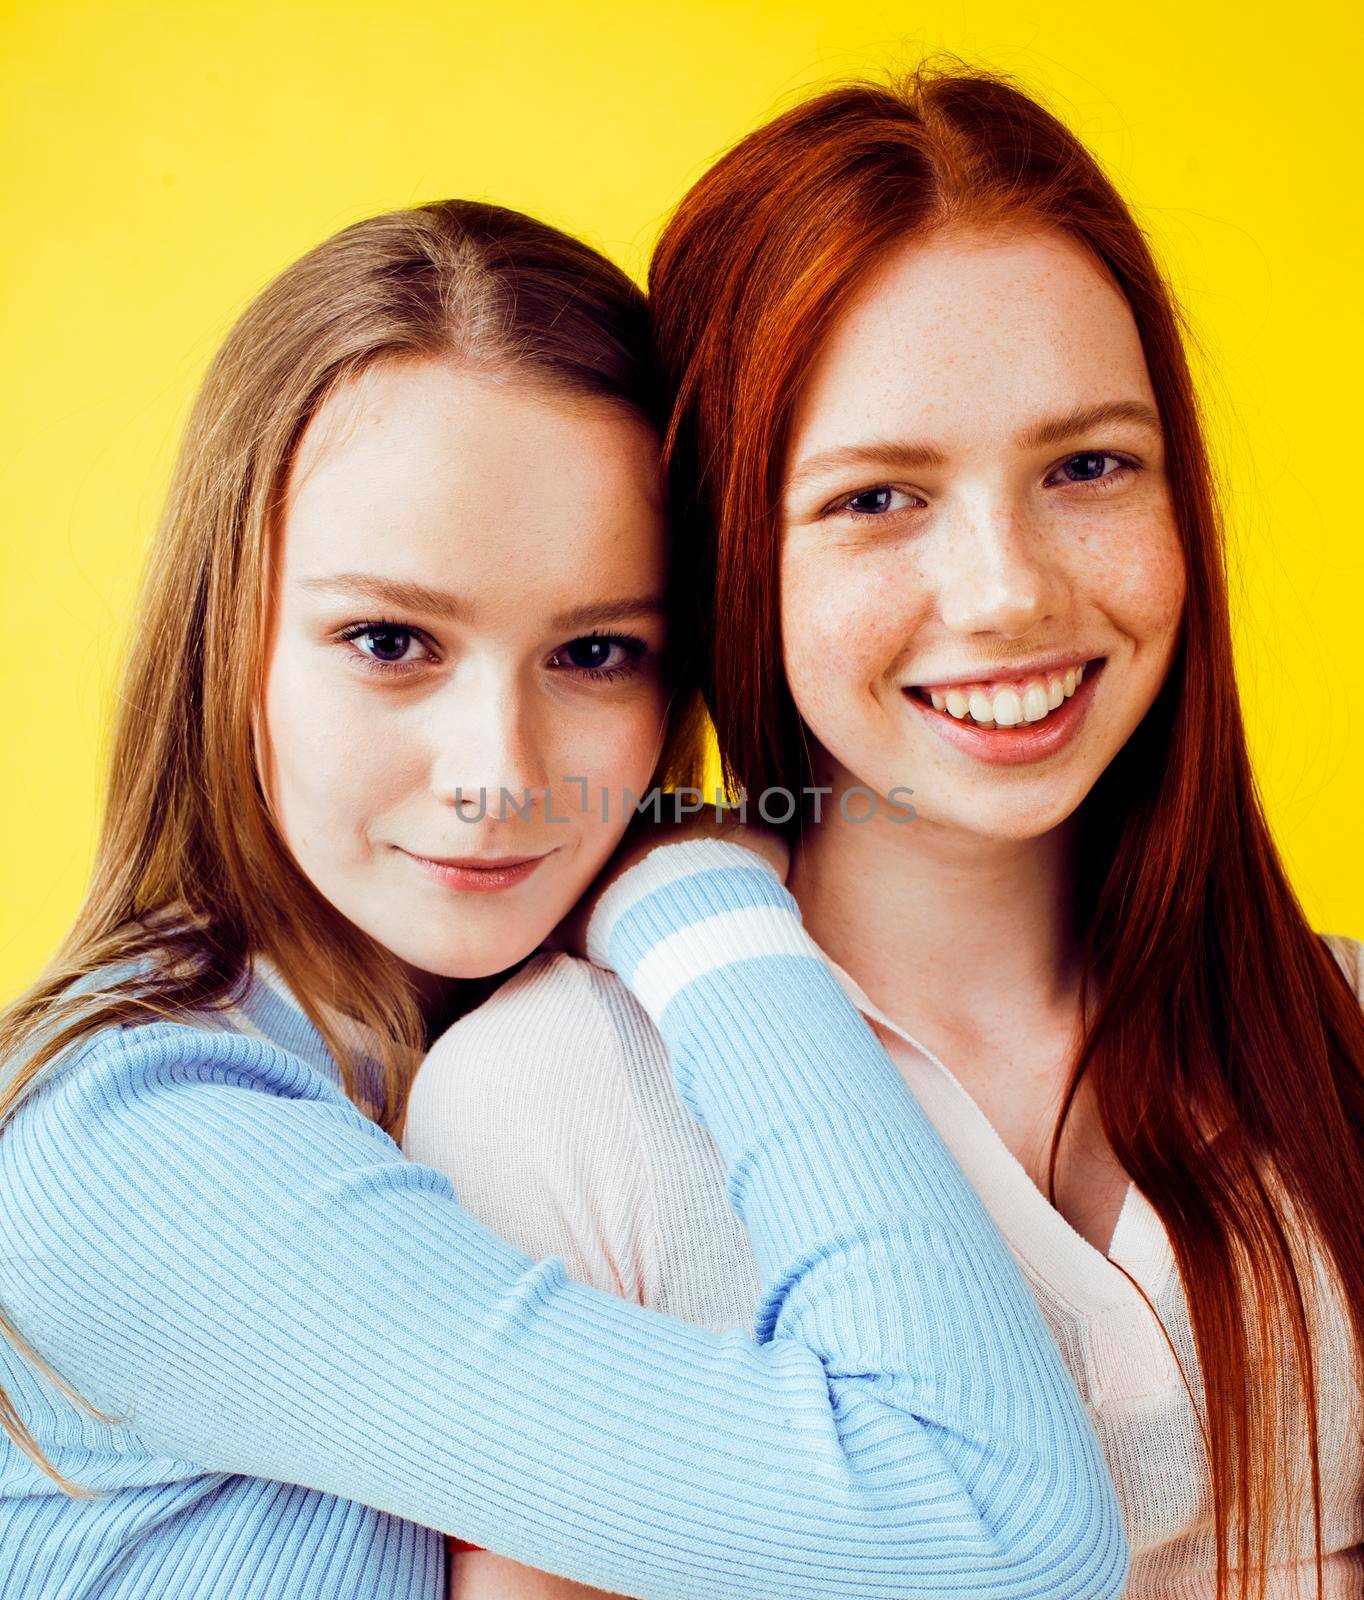 lifestyle people concept: two pretty young school teenage girls having fun happy smiling on yellow background by JordanJ